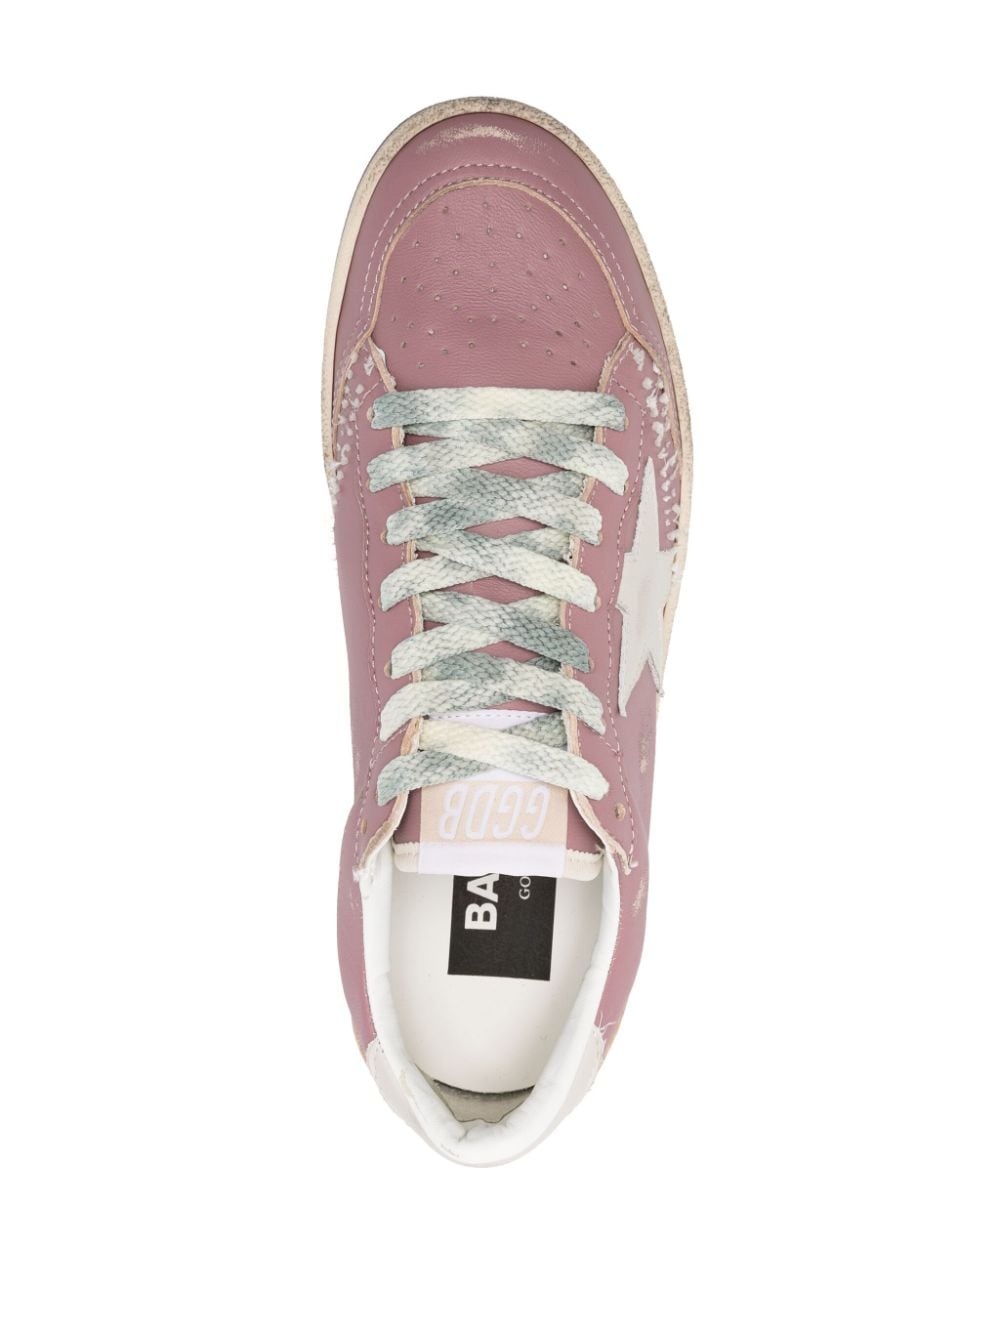 Ball Star leather sneakers - 4